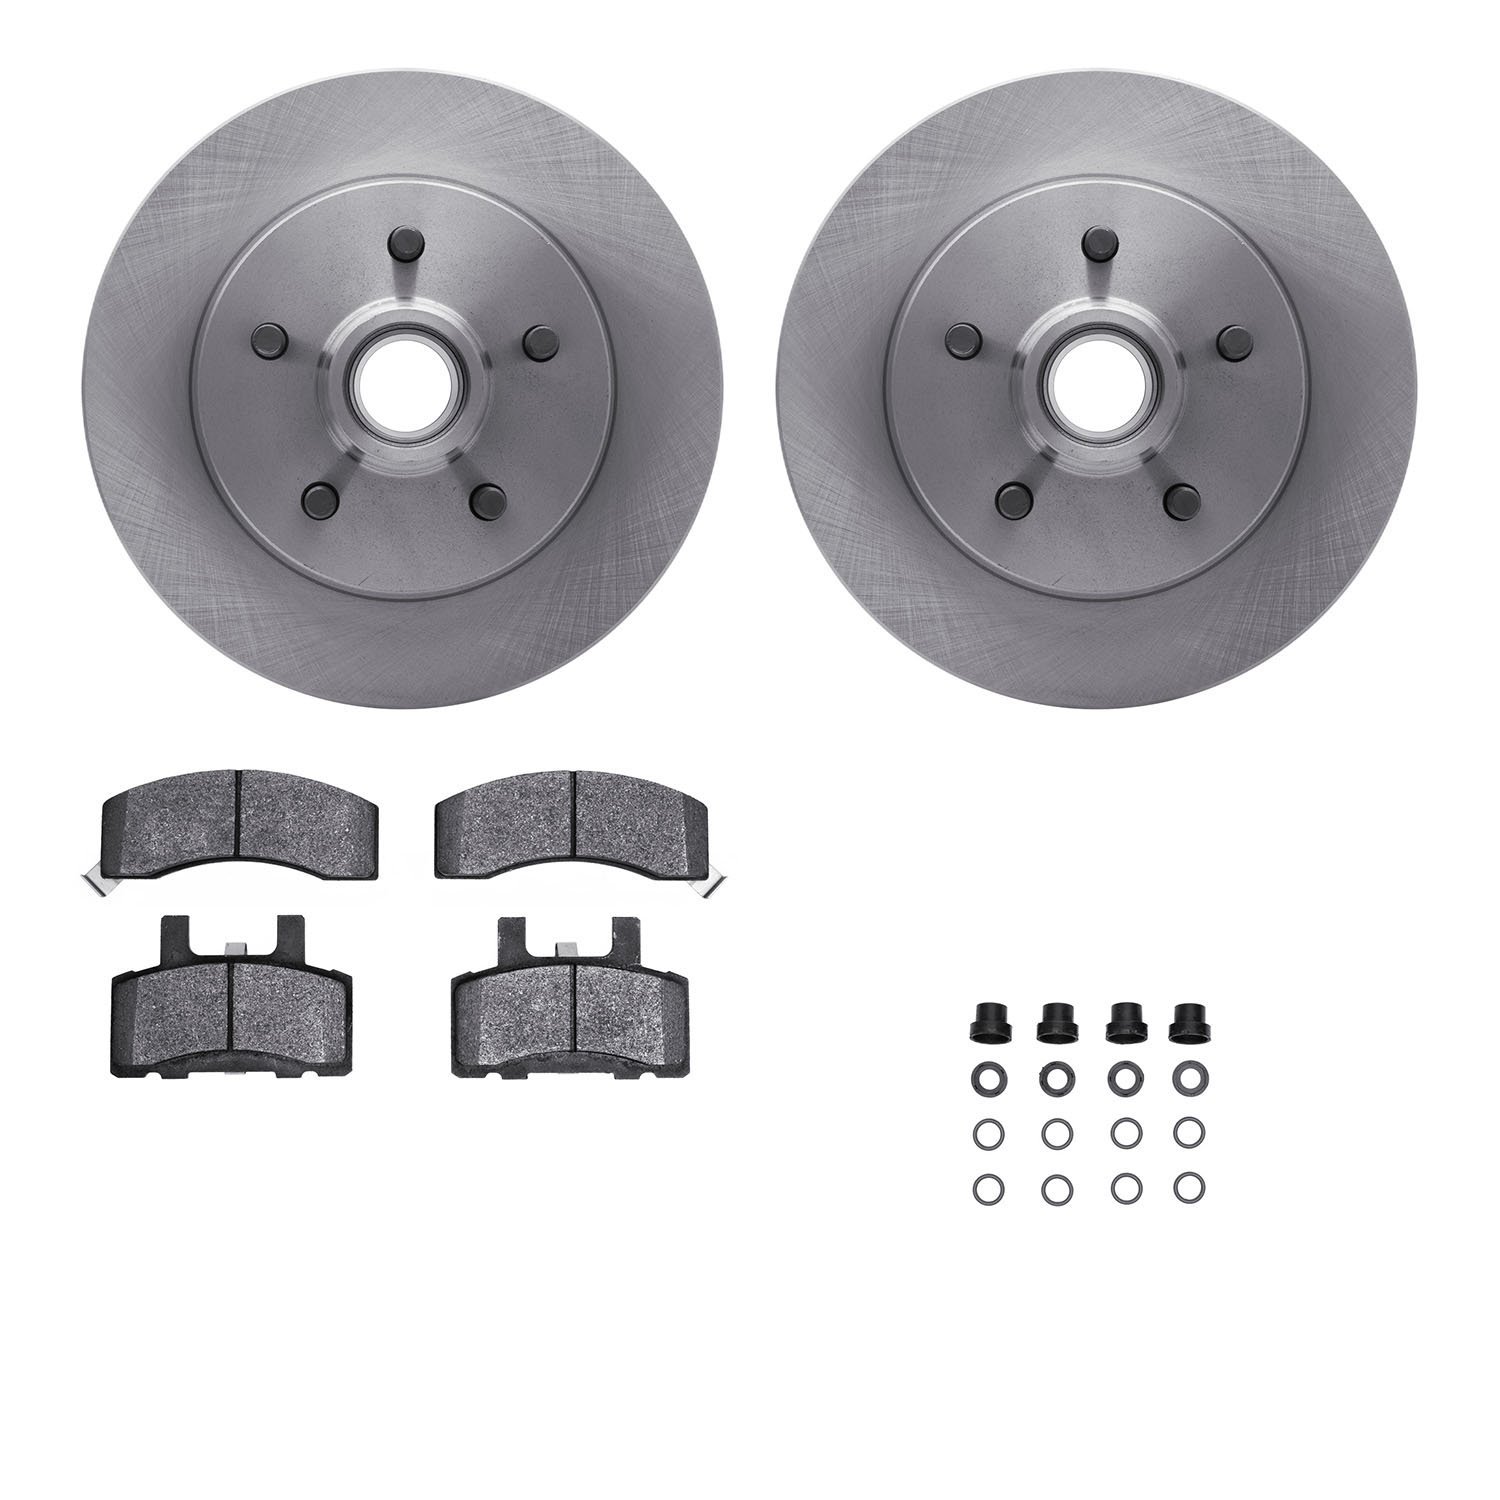 6412-48035 Brake Rotors with Ultimate-Duty Brake Pads Kit & Hardware, 1998-2000 GM, Position: Front